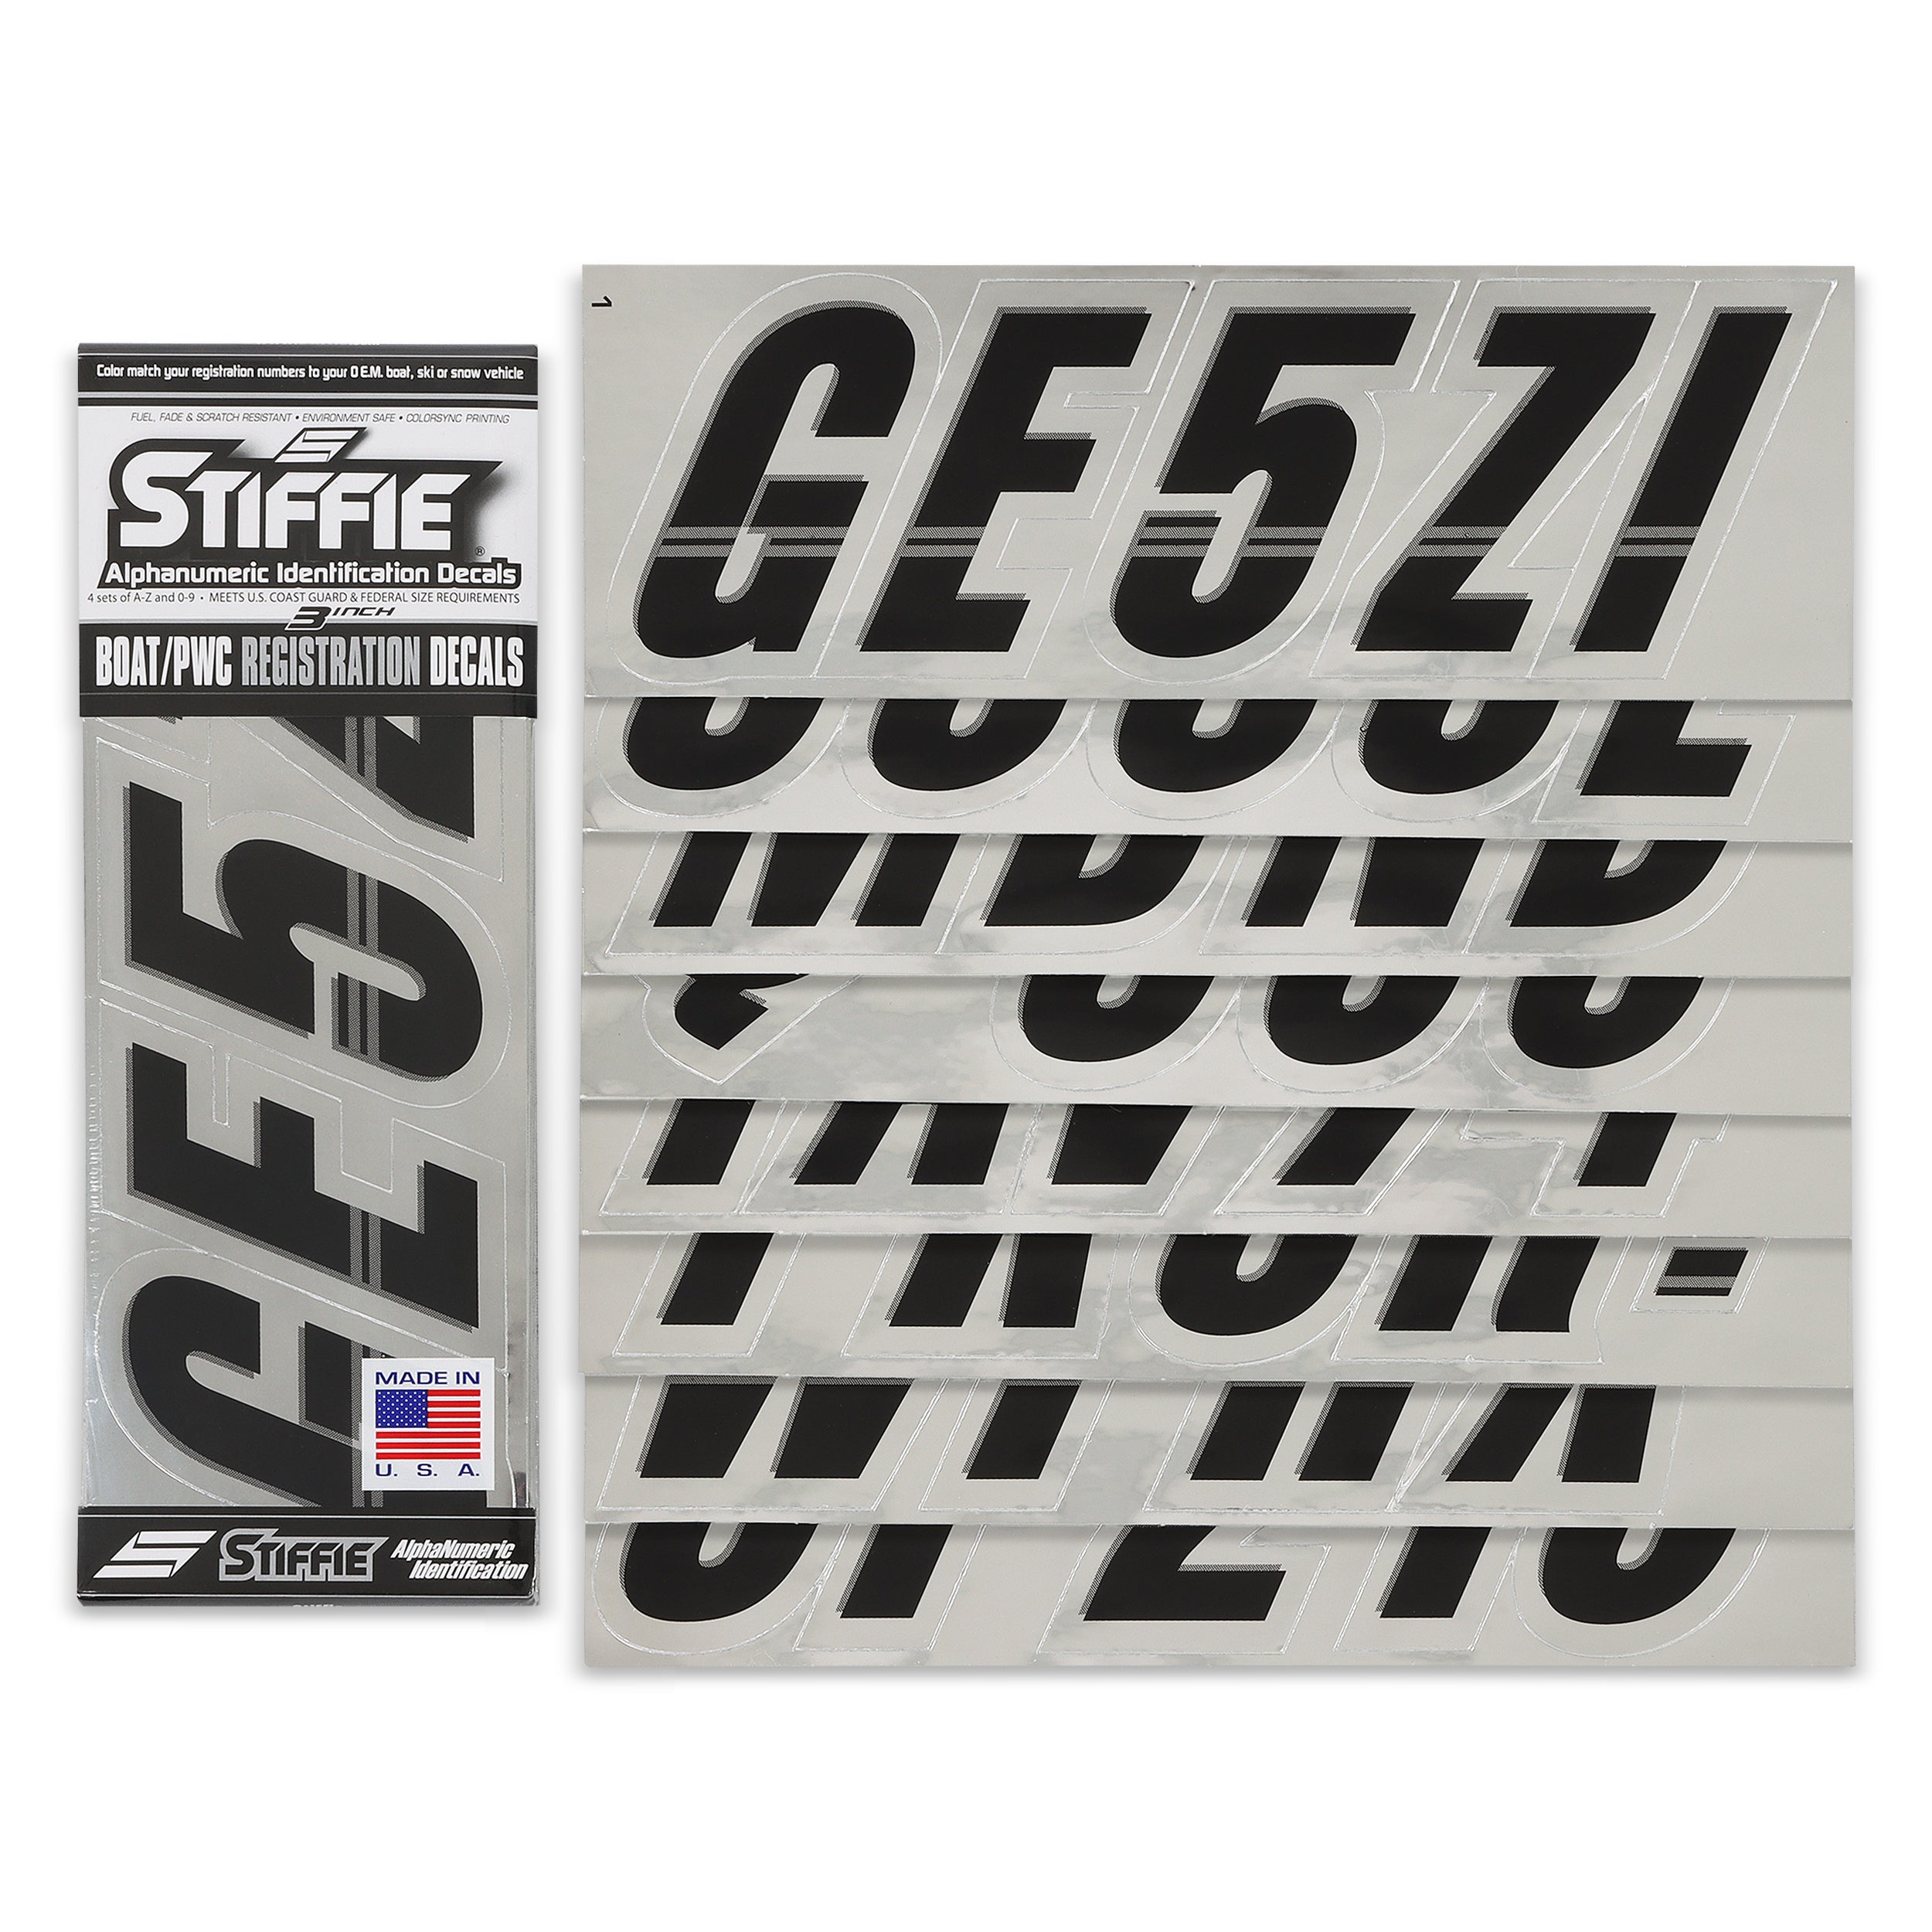 STIFFIE Techtron Black/Chrome 3" Alpha-Numeric Registration Identification Numbers Stickers Decals for Boats & Personal Watercraft